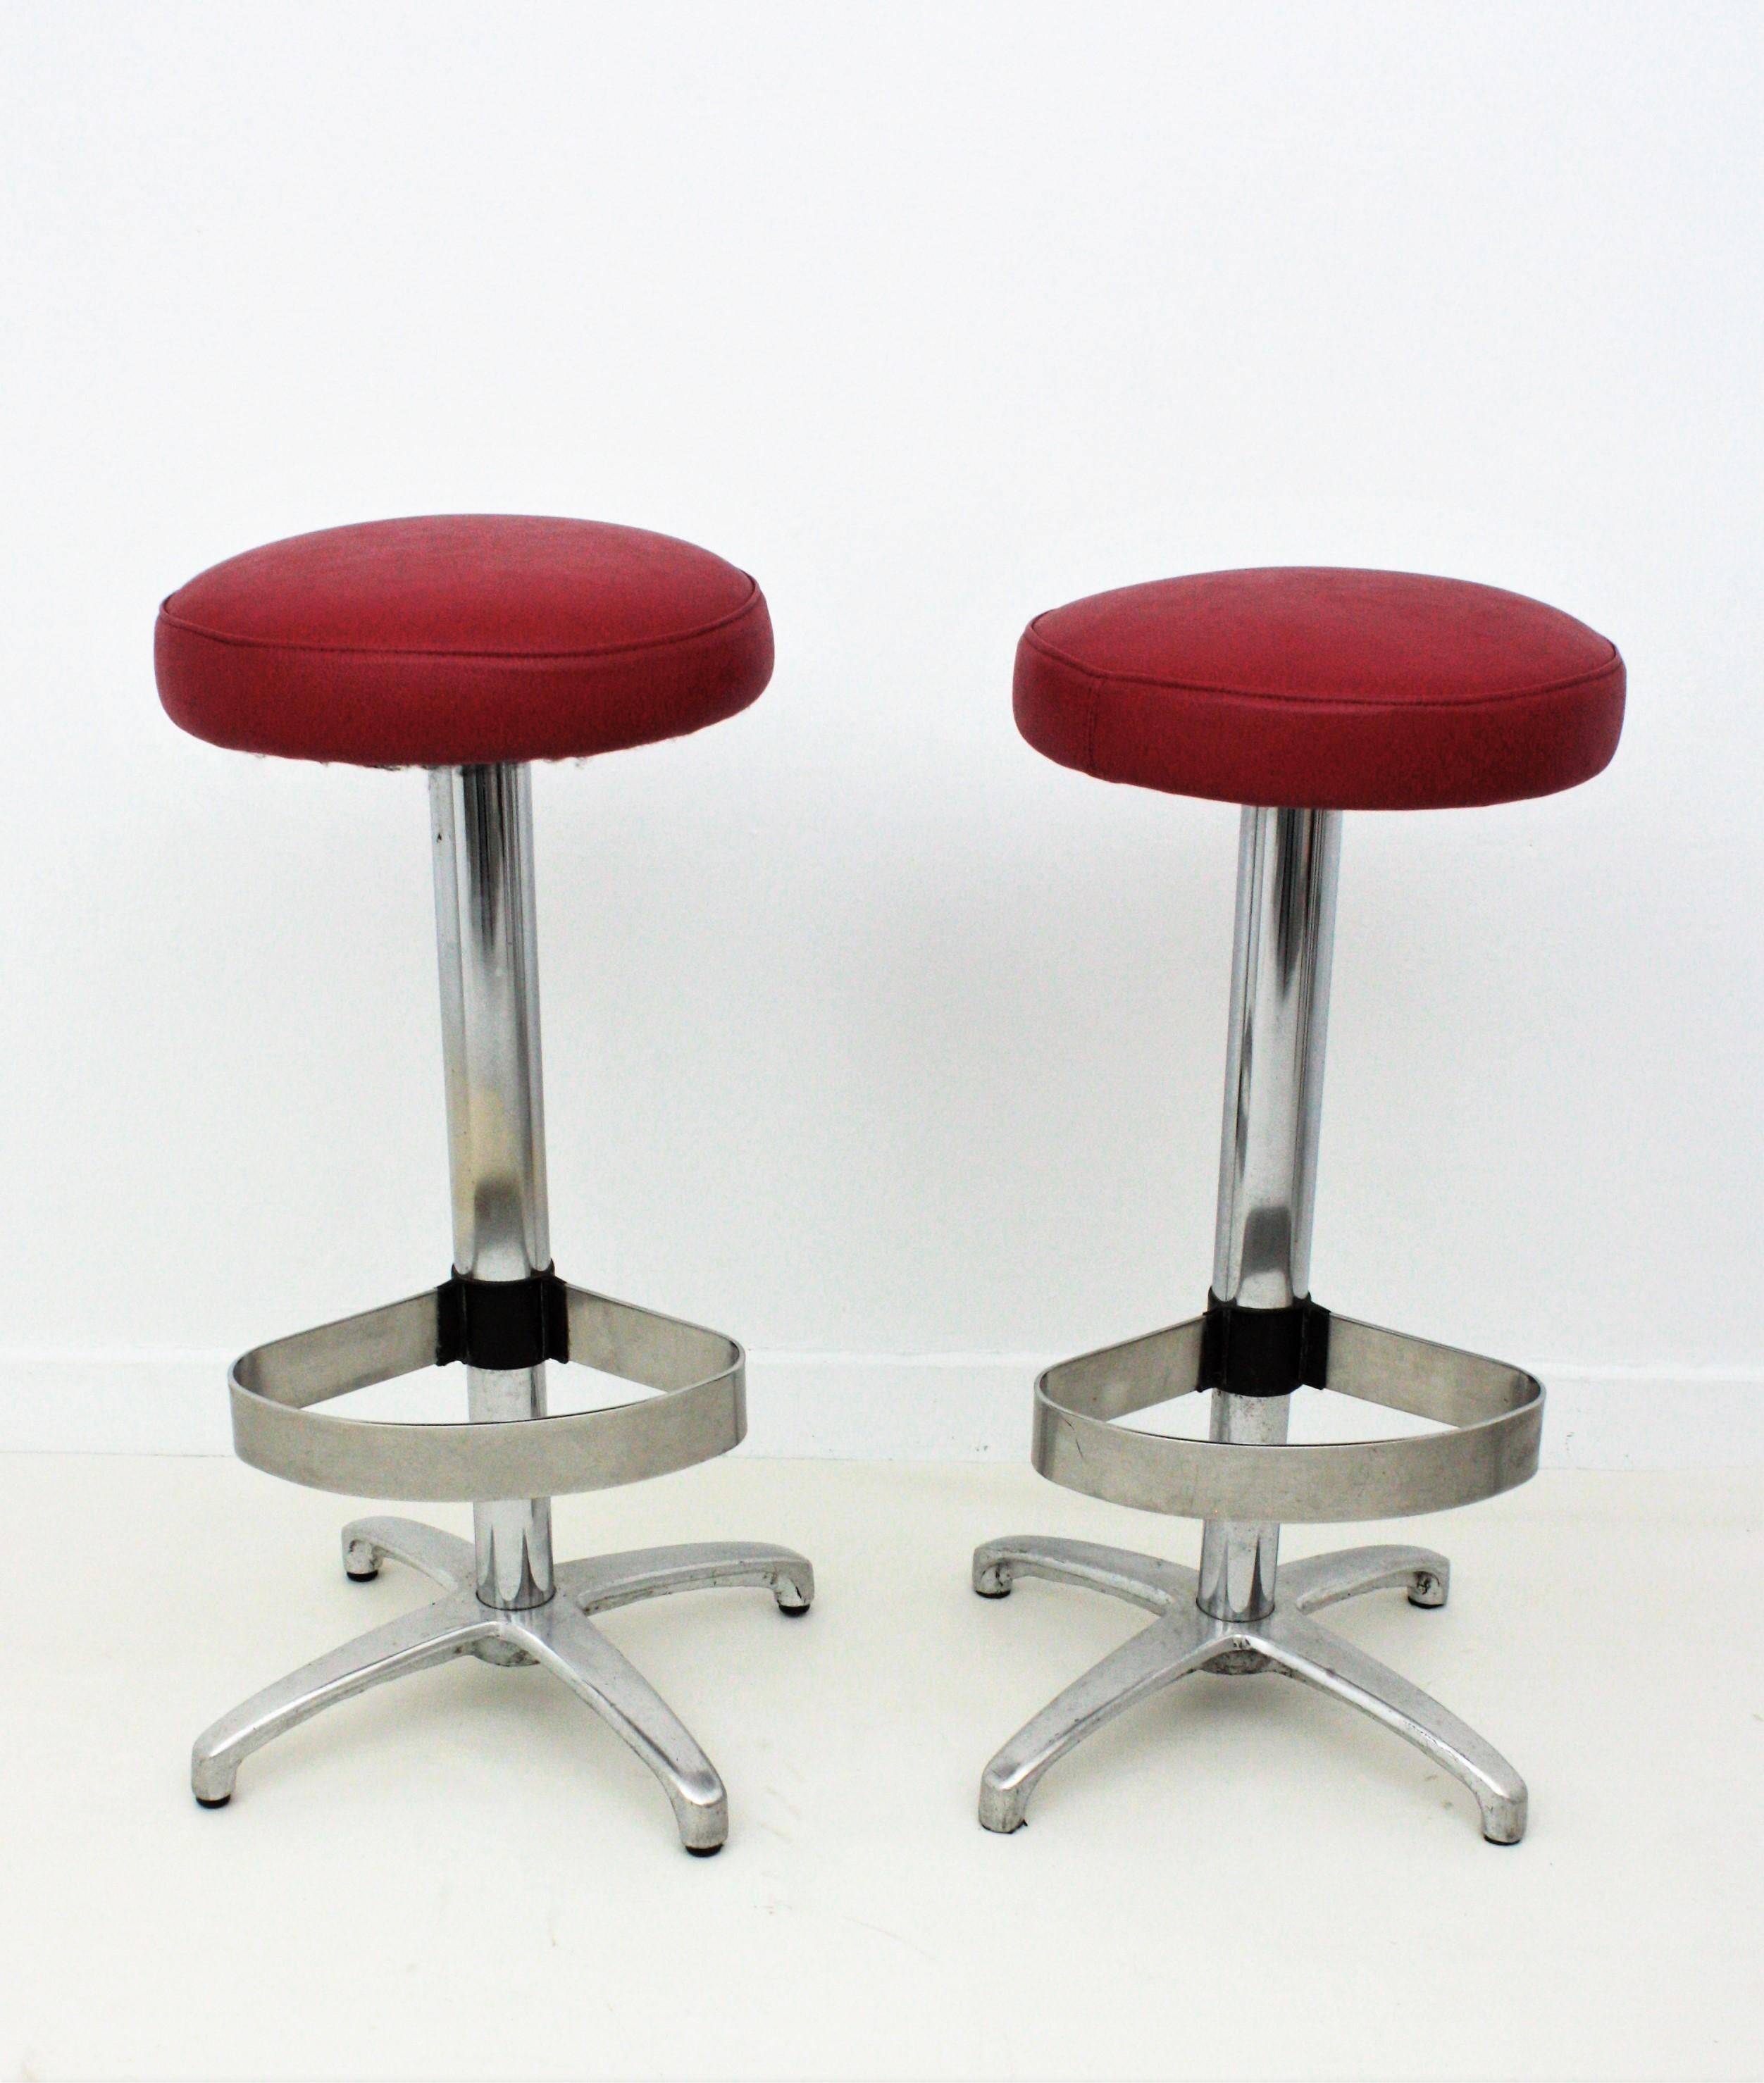 Four Midcentury Bar Stools in Metal Upholstered in Red Leatherette For Sale 6